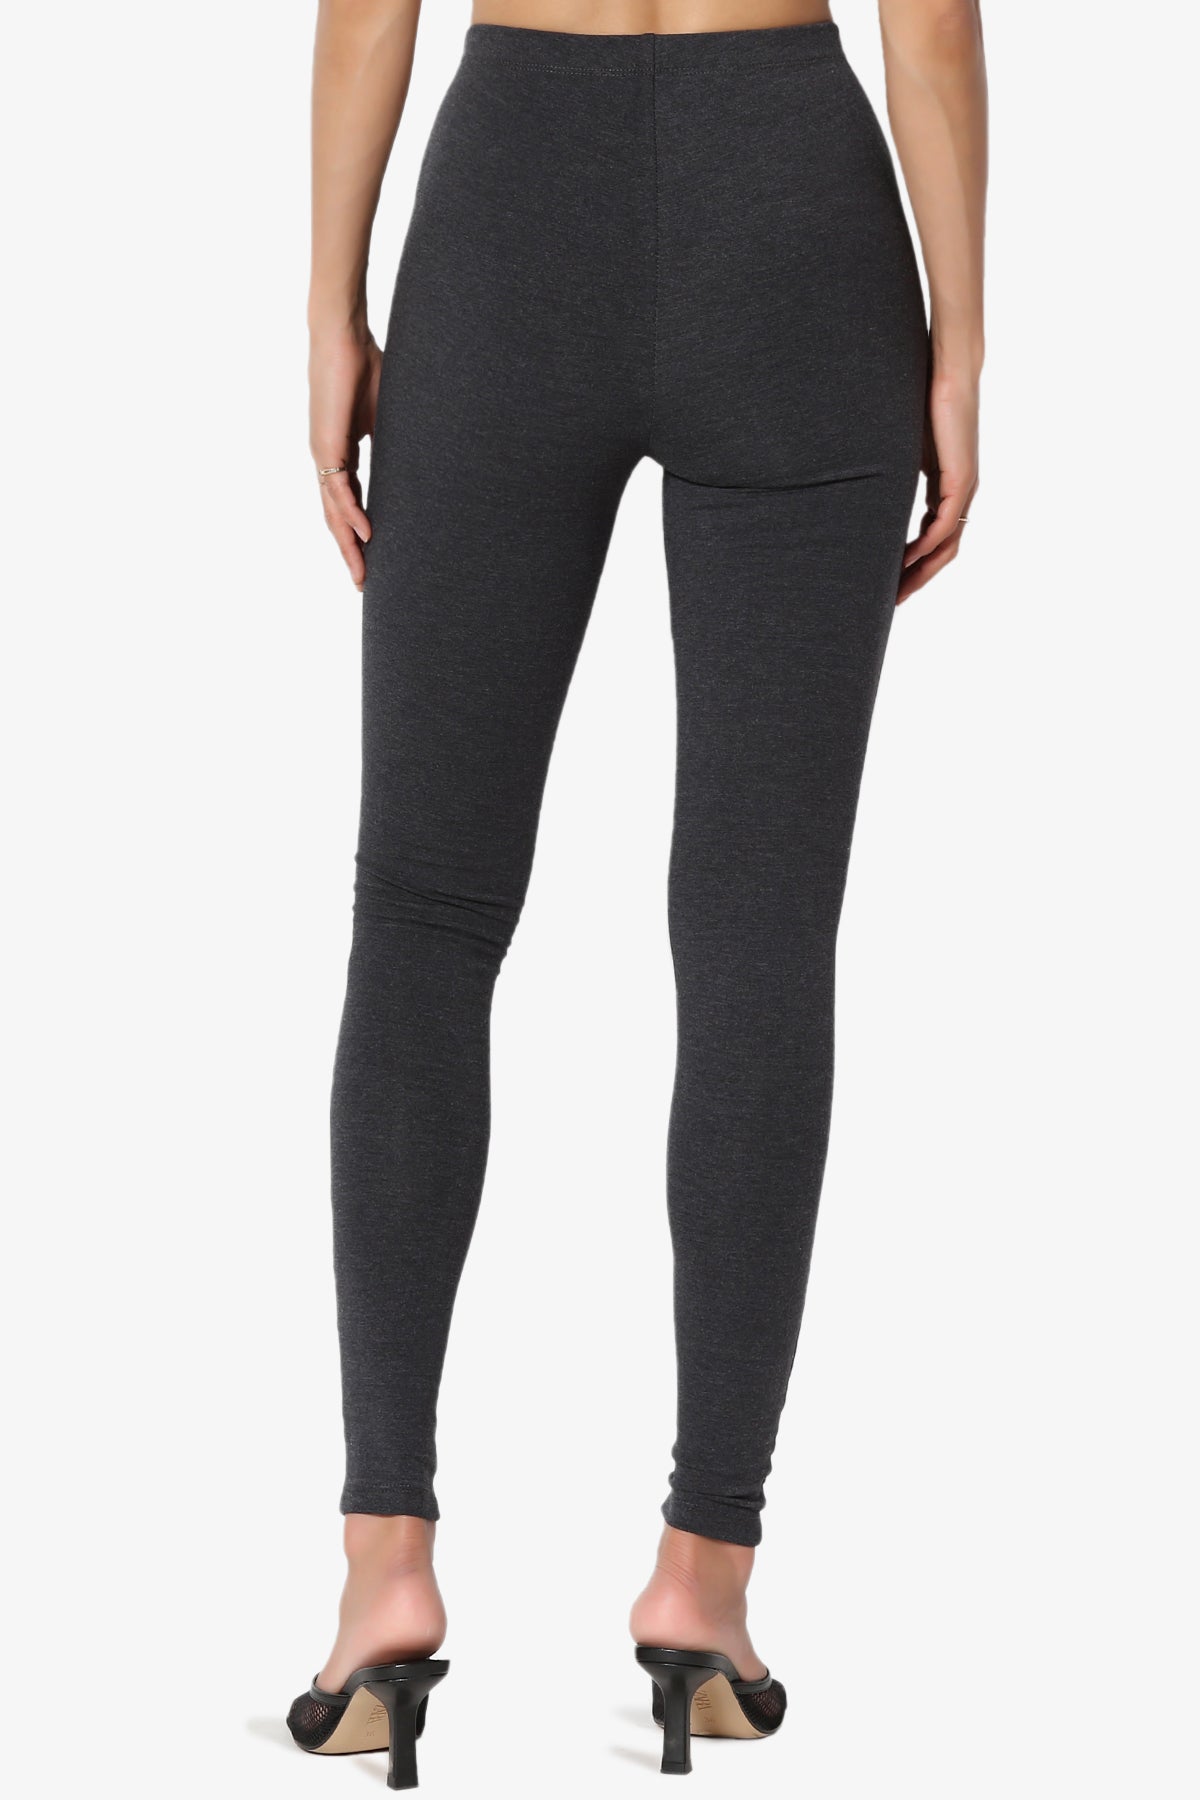 Ansley Luxe Cotton Ankle Leggings PLUS